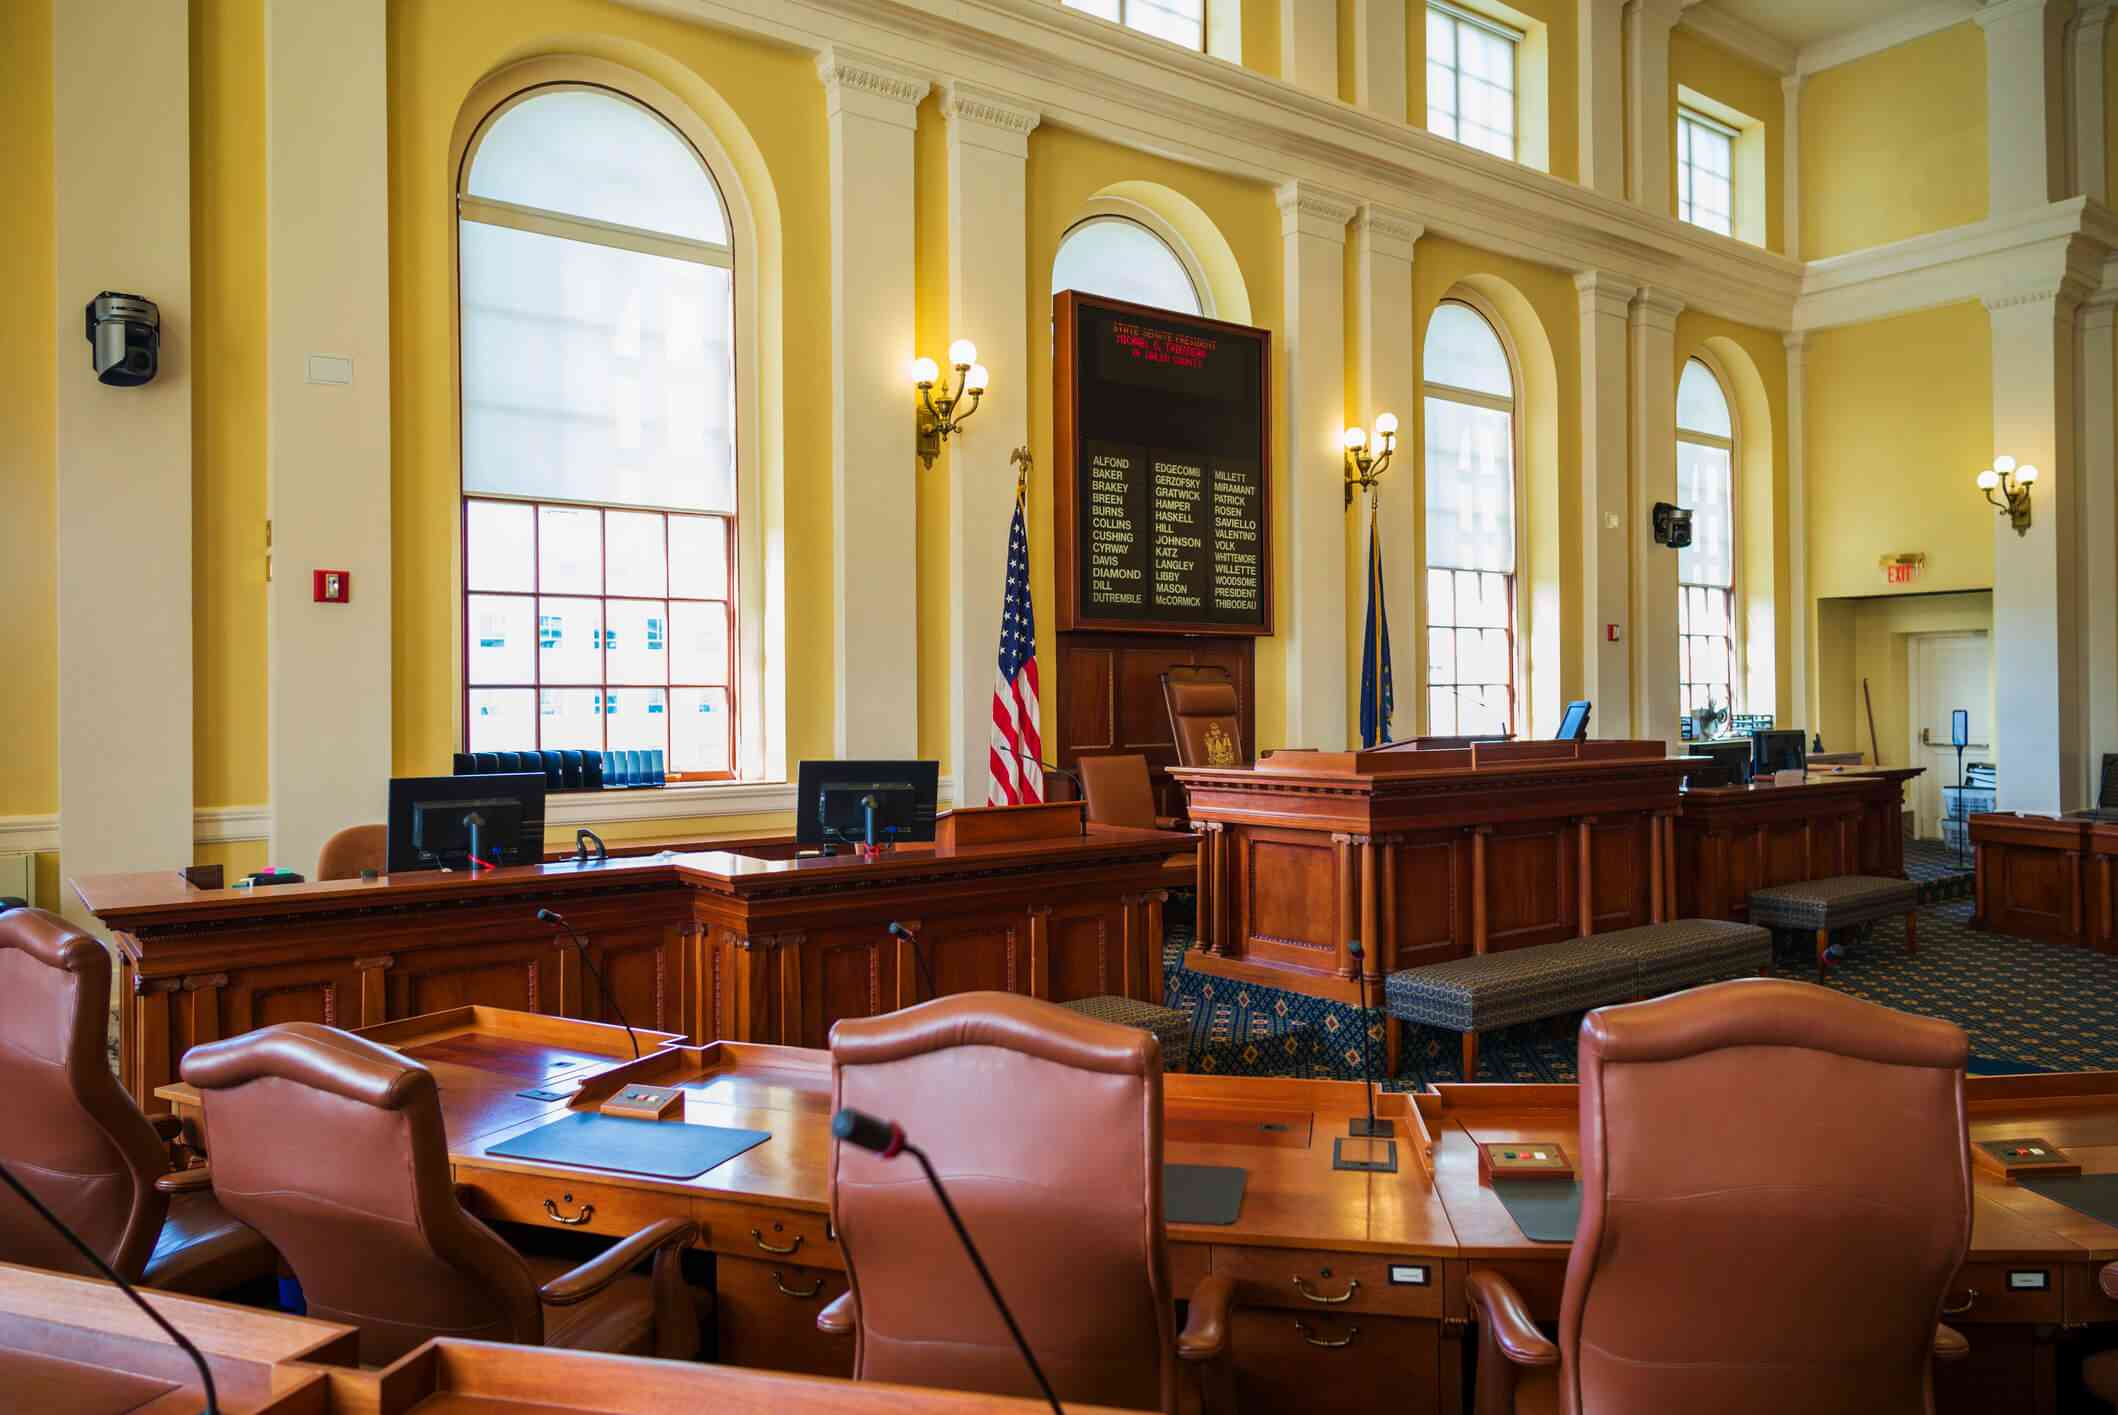 A close up of a courthouse room.